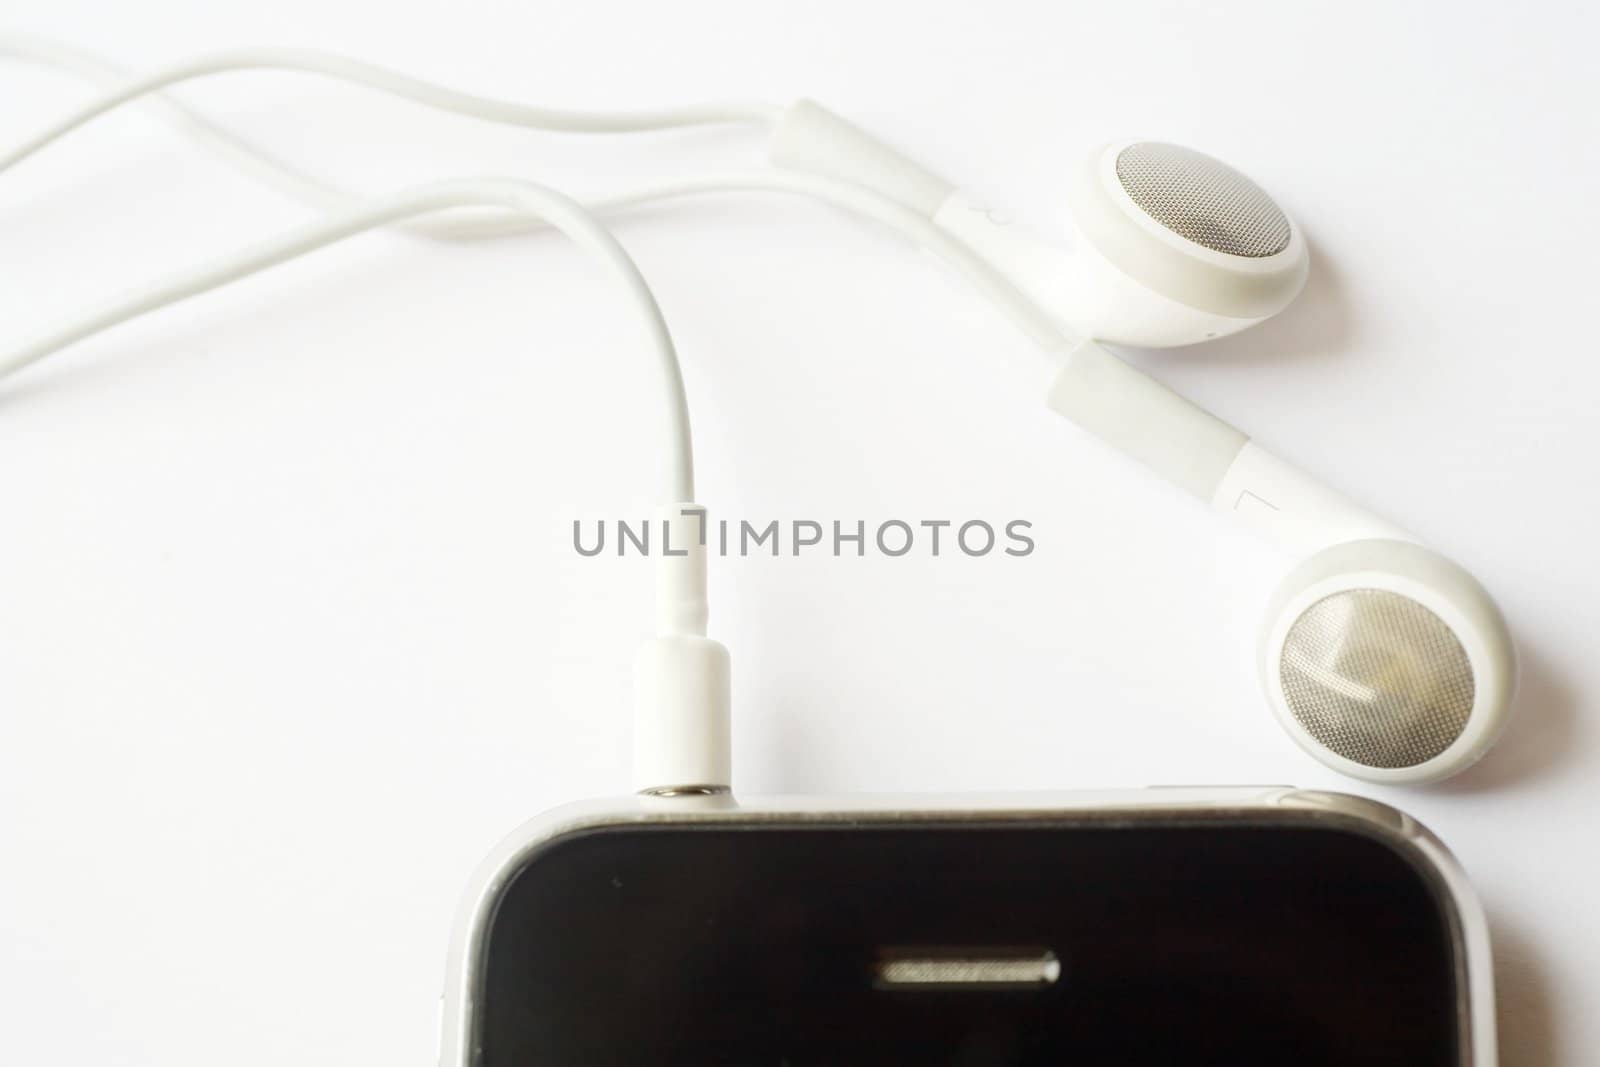 An image of little white headphones and mobile phone